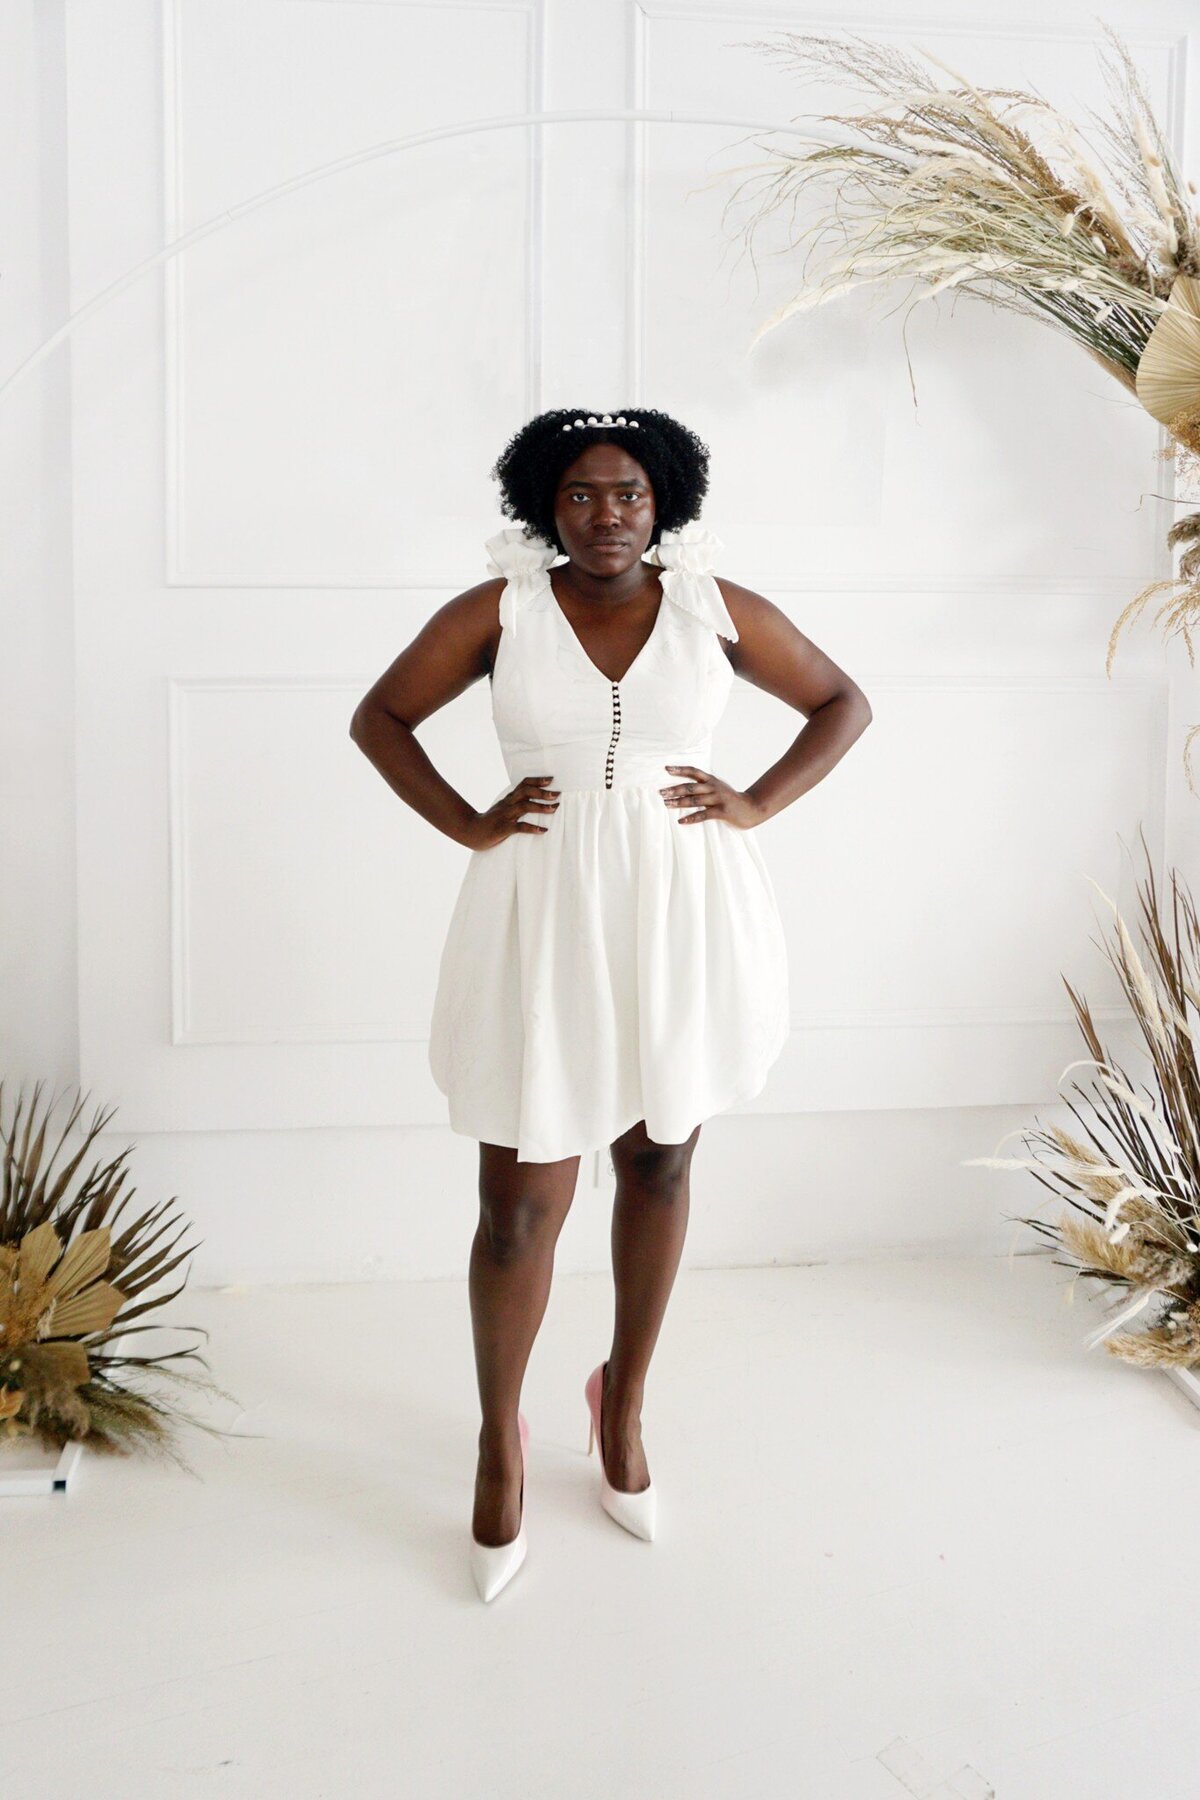 Black model wearing a size-inclusive little white wedding dress. The style features pearl embellishments and shoulder ruffles.